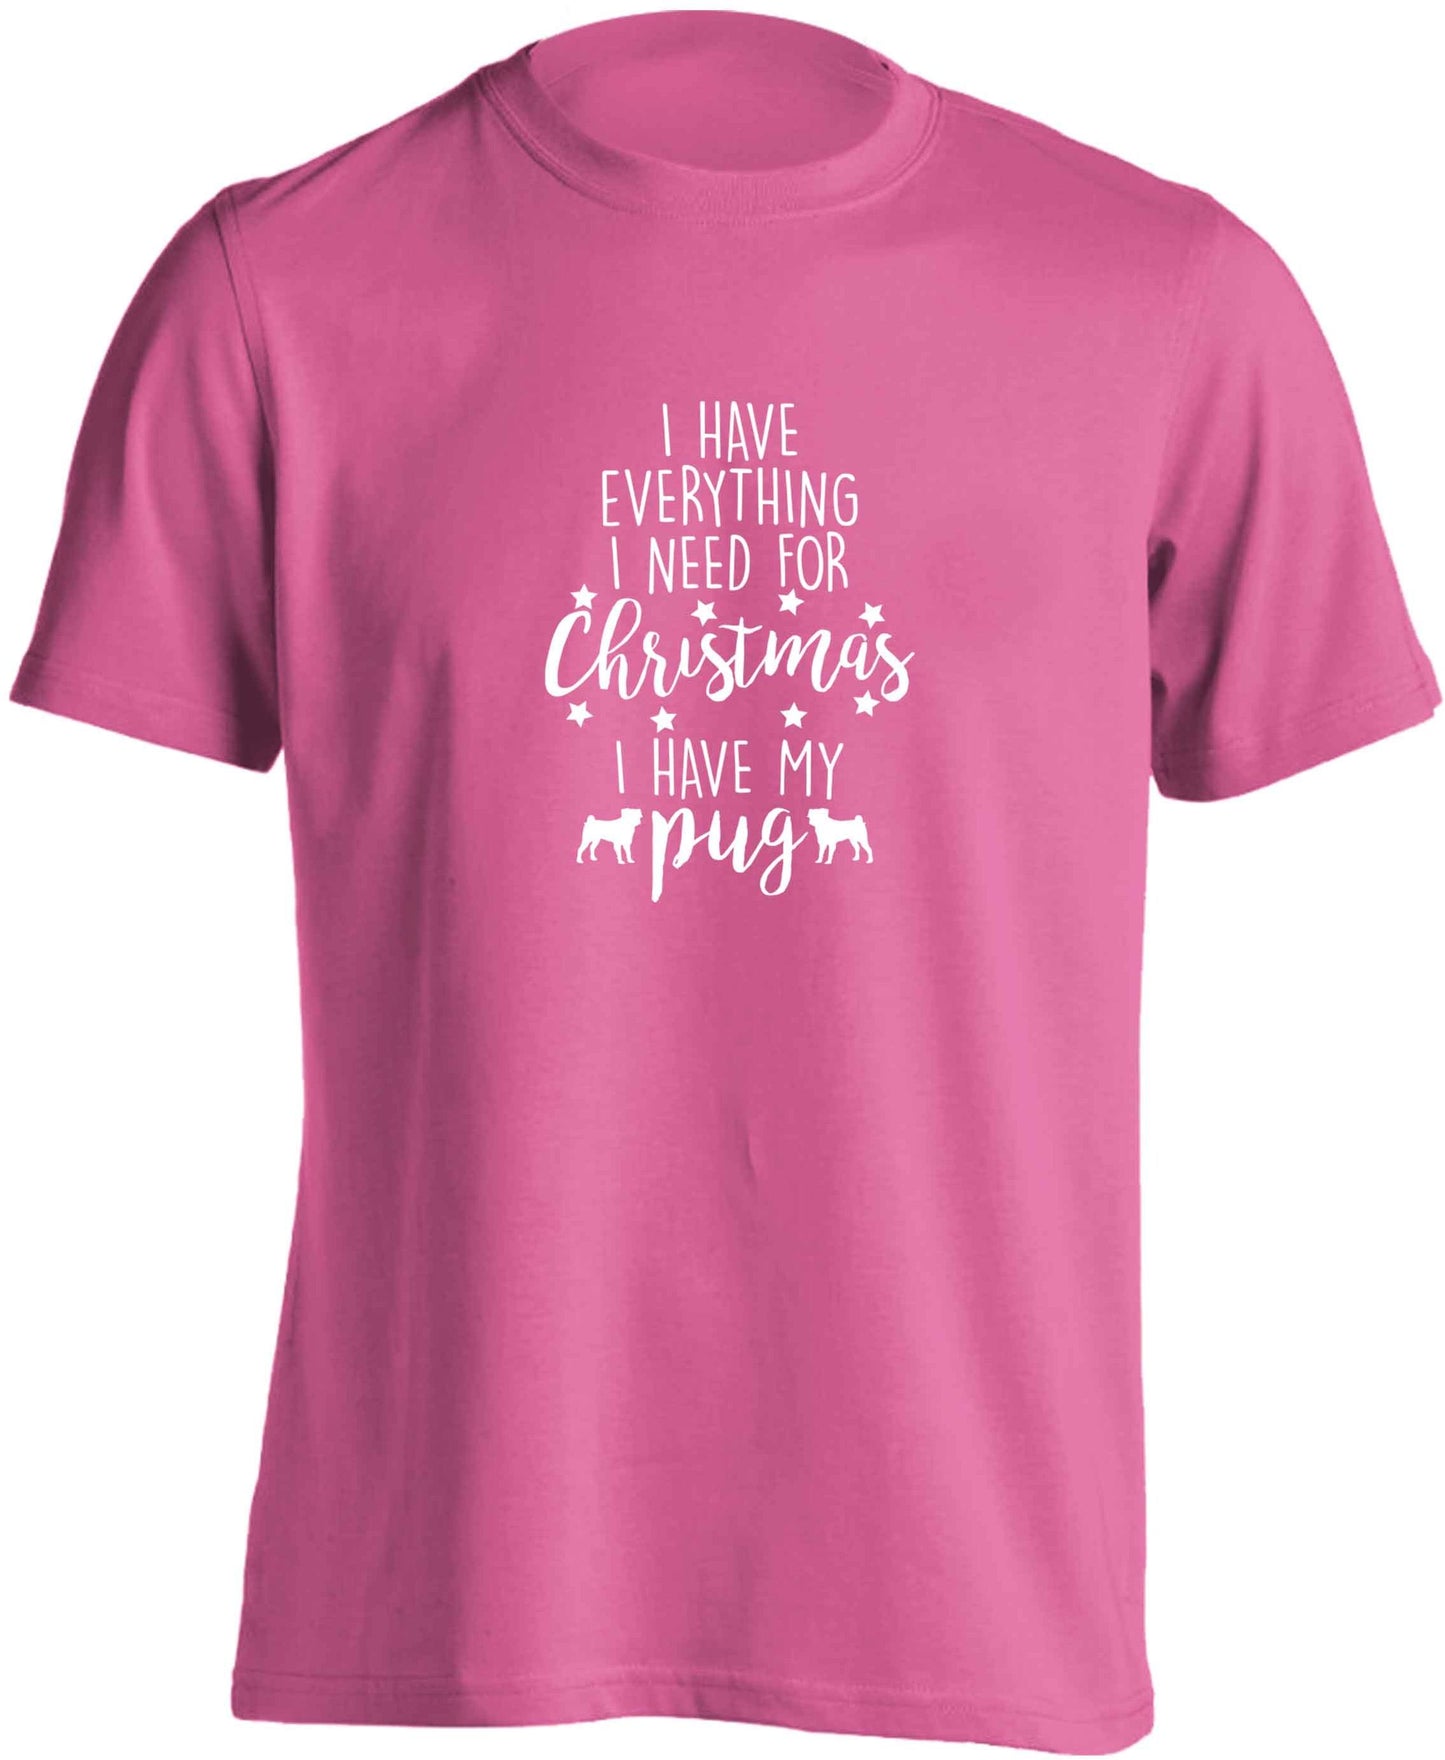 I have everything I need for Christmas I have my pug adults unisex pink Tshirt 2XL